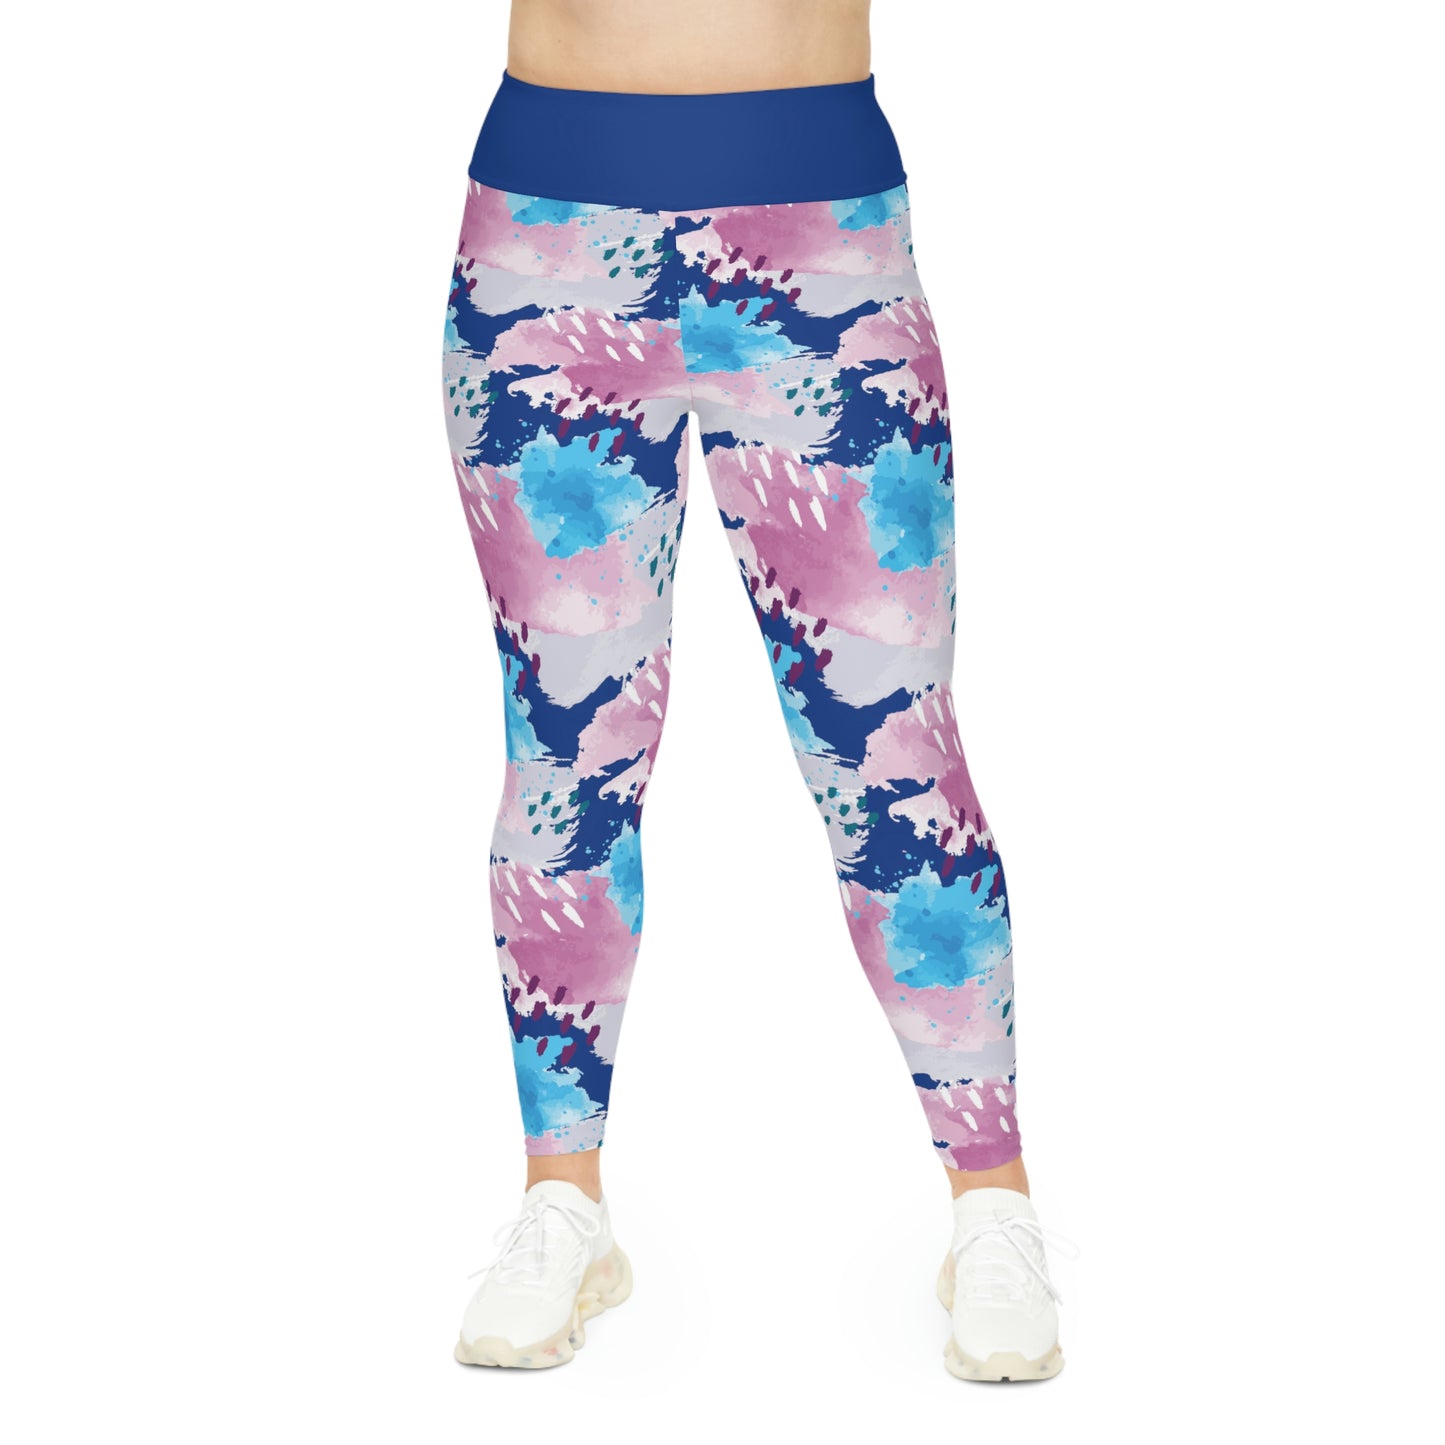 Tye Dye Plus Size Leggings One of a Kind Gift - Unique Workout Activewear tights for Mom fitness, Mothers Day, Girlfriend Christmas Gift